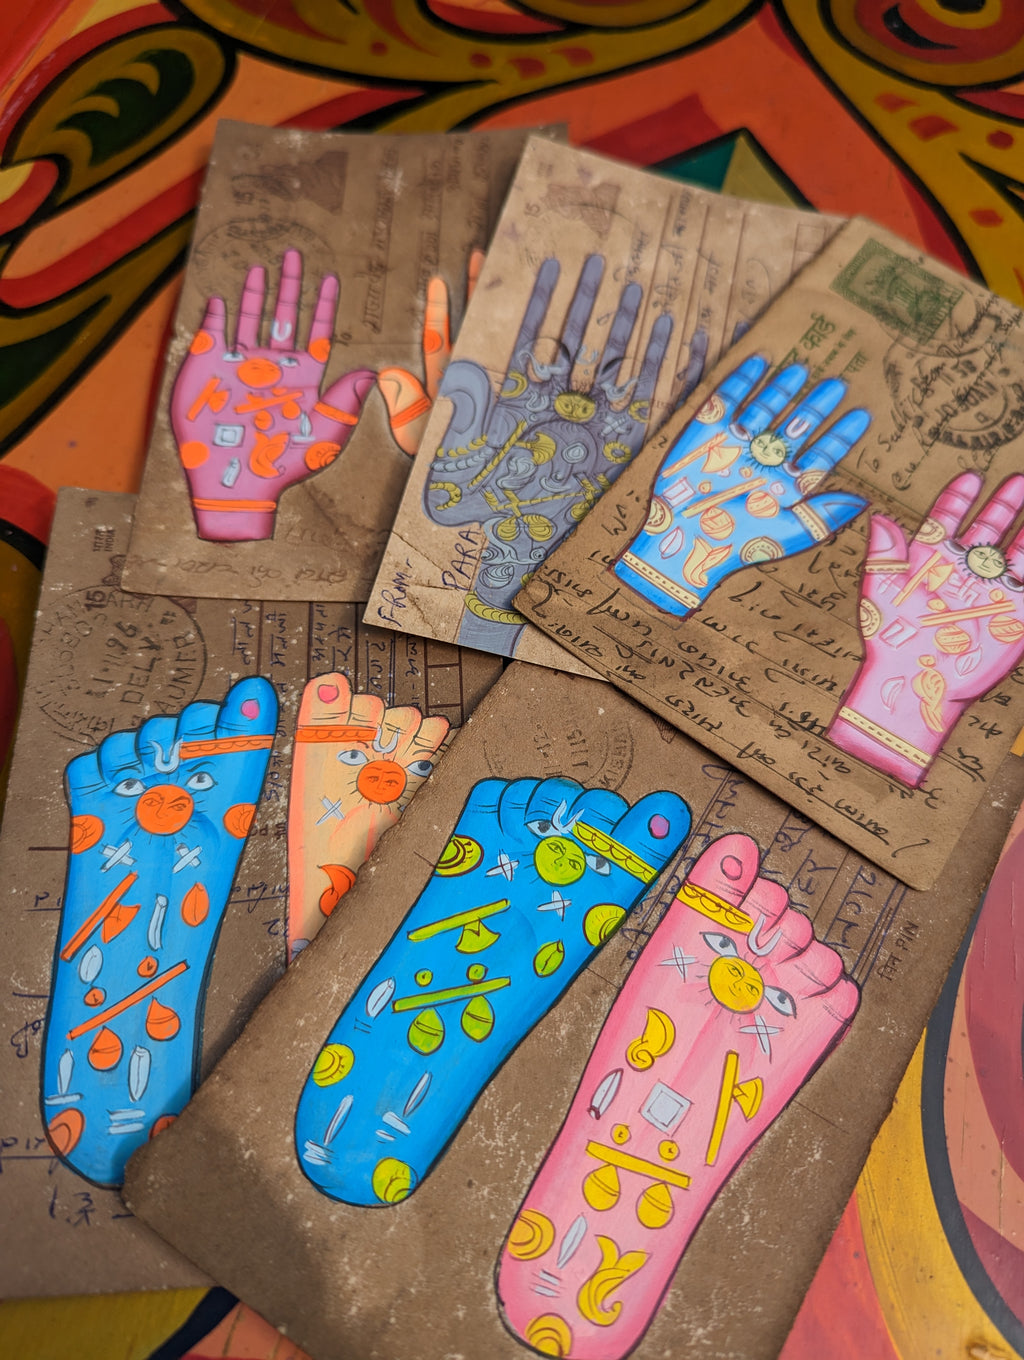 This form of painting in India is typically undertaken by the apprentices learning to paintdata:text/mce-internal,rte__editor,miniatures . They often used recycled documents, letters and in this case postcards. All are original pieces in glorious colours .

 

hands and feet chakras